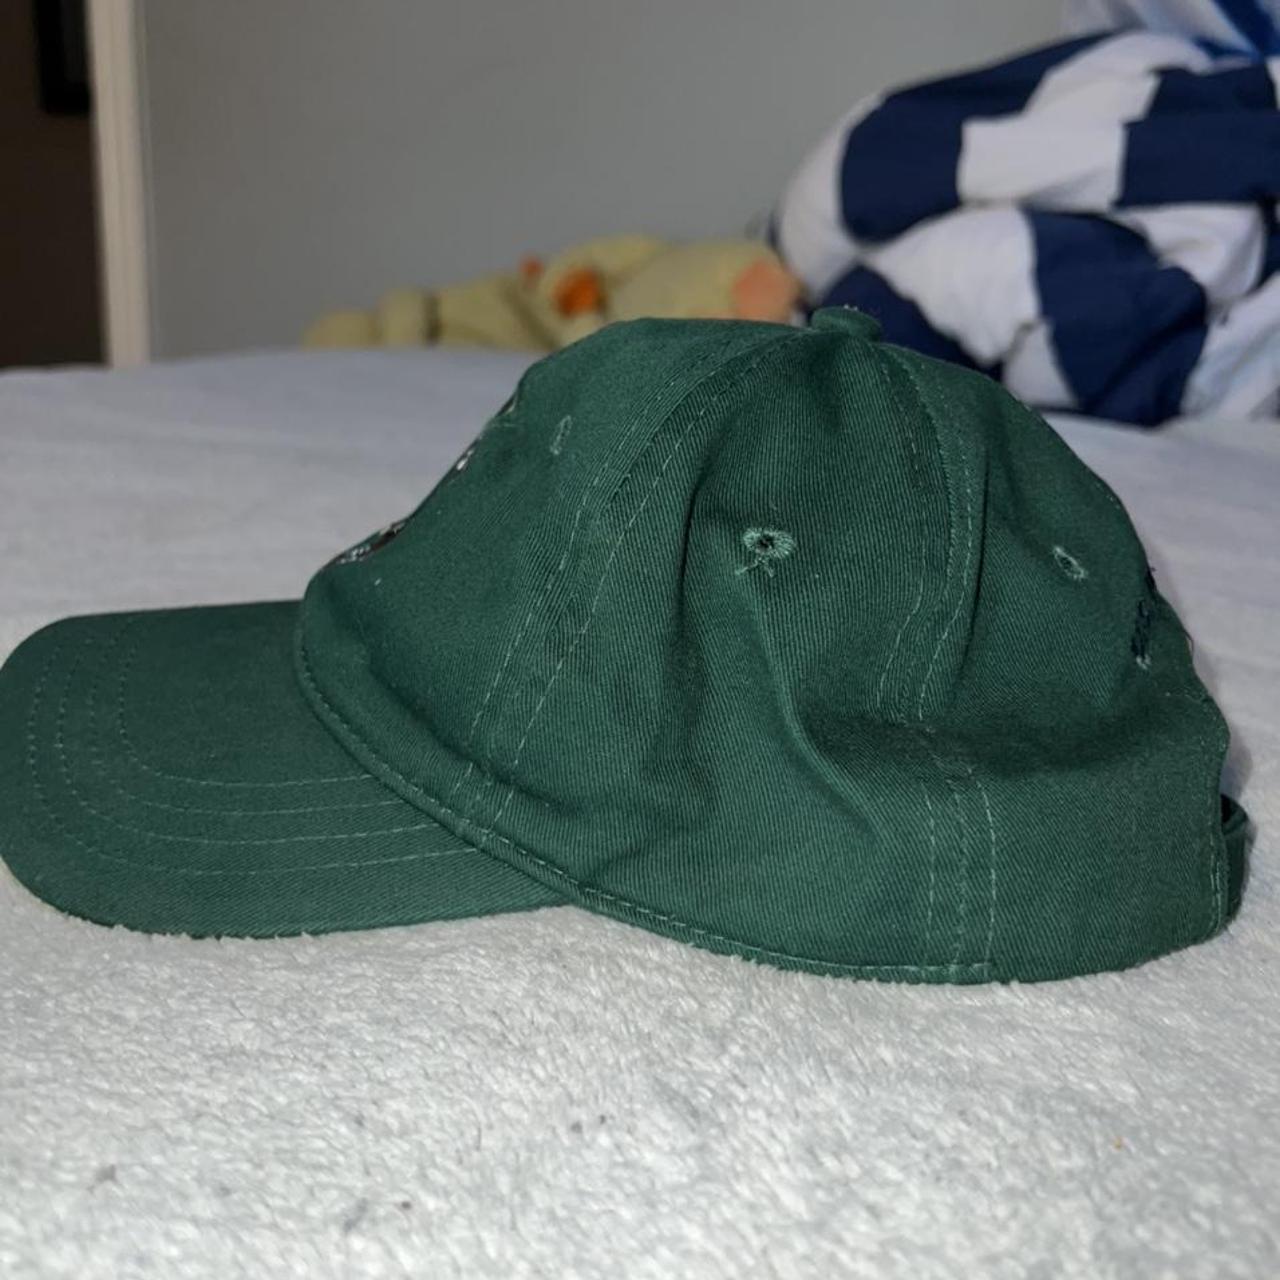 U.S. Polo Assn. Men's Green and Red Hat (2)